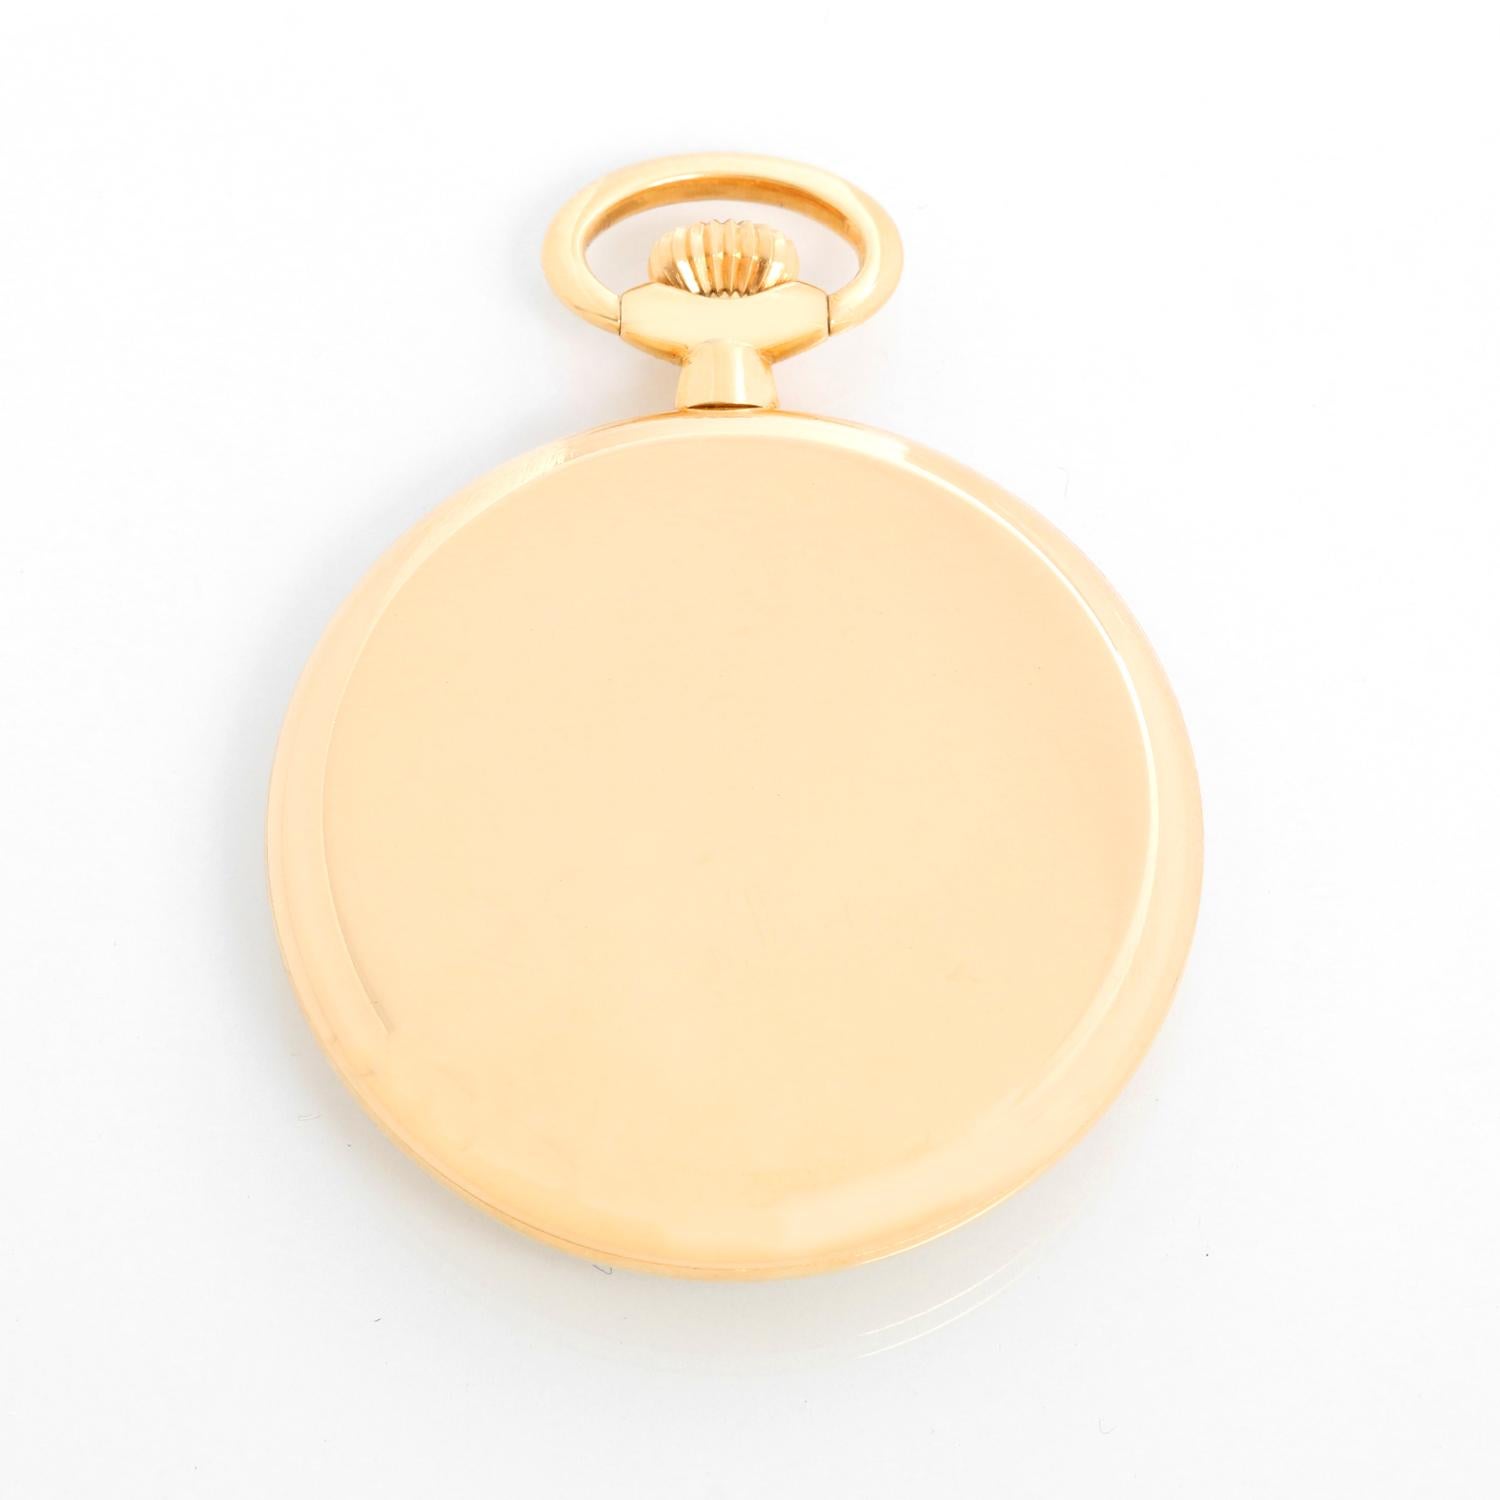 Patek Philippe & Co. 18K Gold Open Face Pendant Pocket Watch Ref. 917 - Manual movement. 18K Yellow Gold Case, monogrammed. Signed Patek Philippe & Co. ( 34mm ). Black Roman numerals. Pre-owned with custom box .